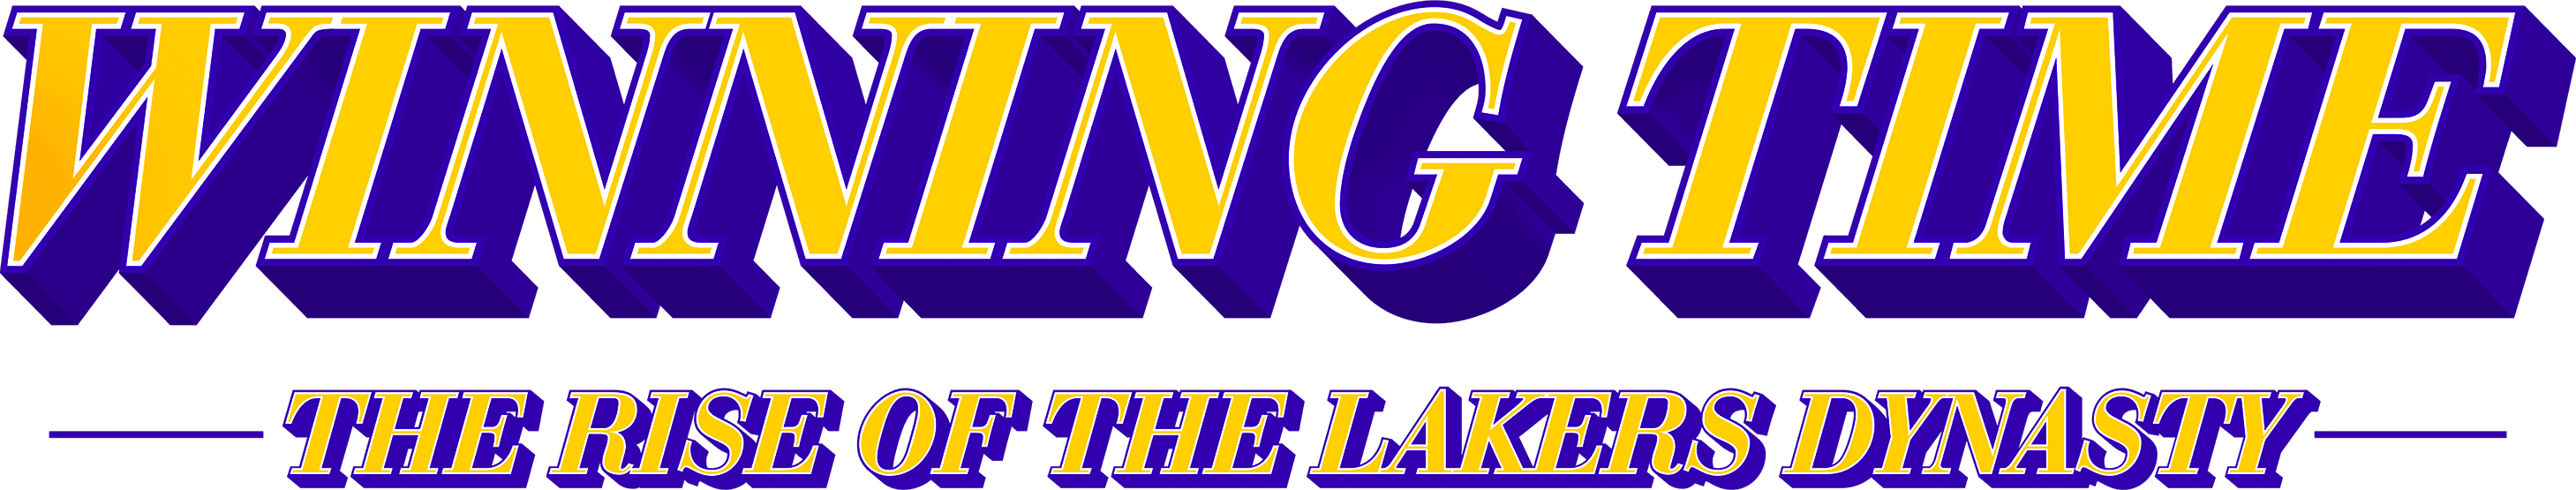 Winning Time: The Rise of the Lakers Dynasty logo